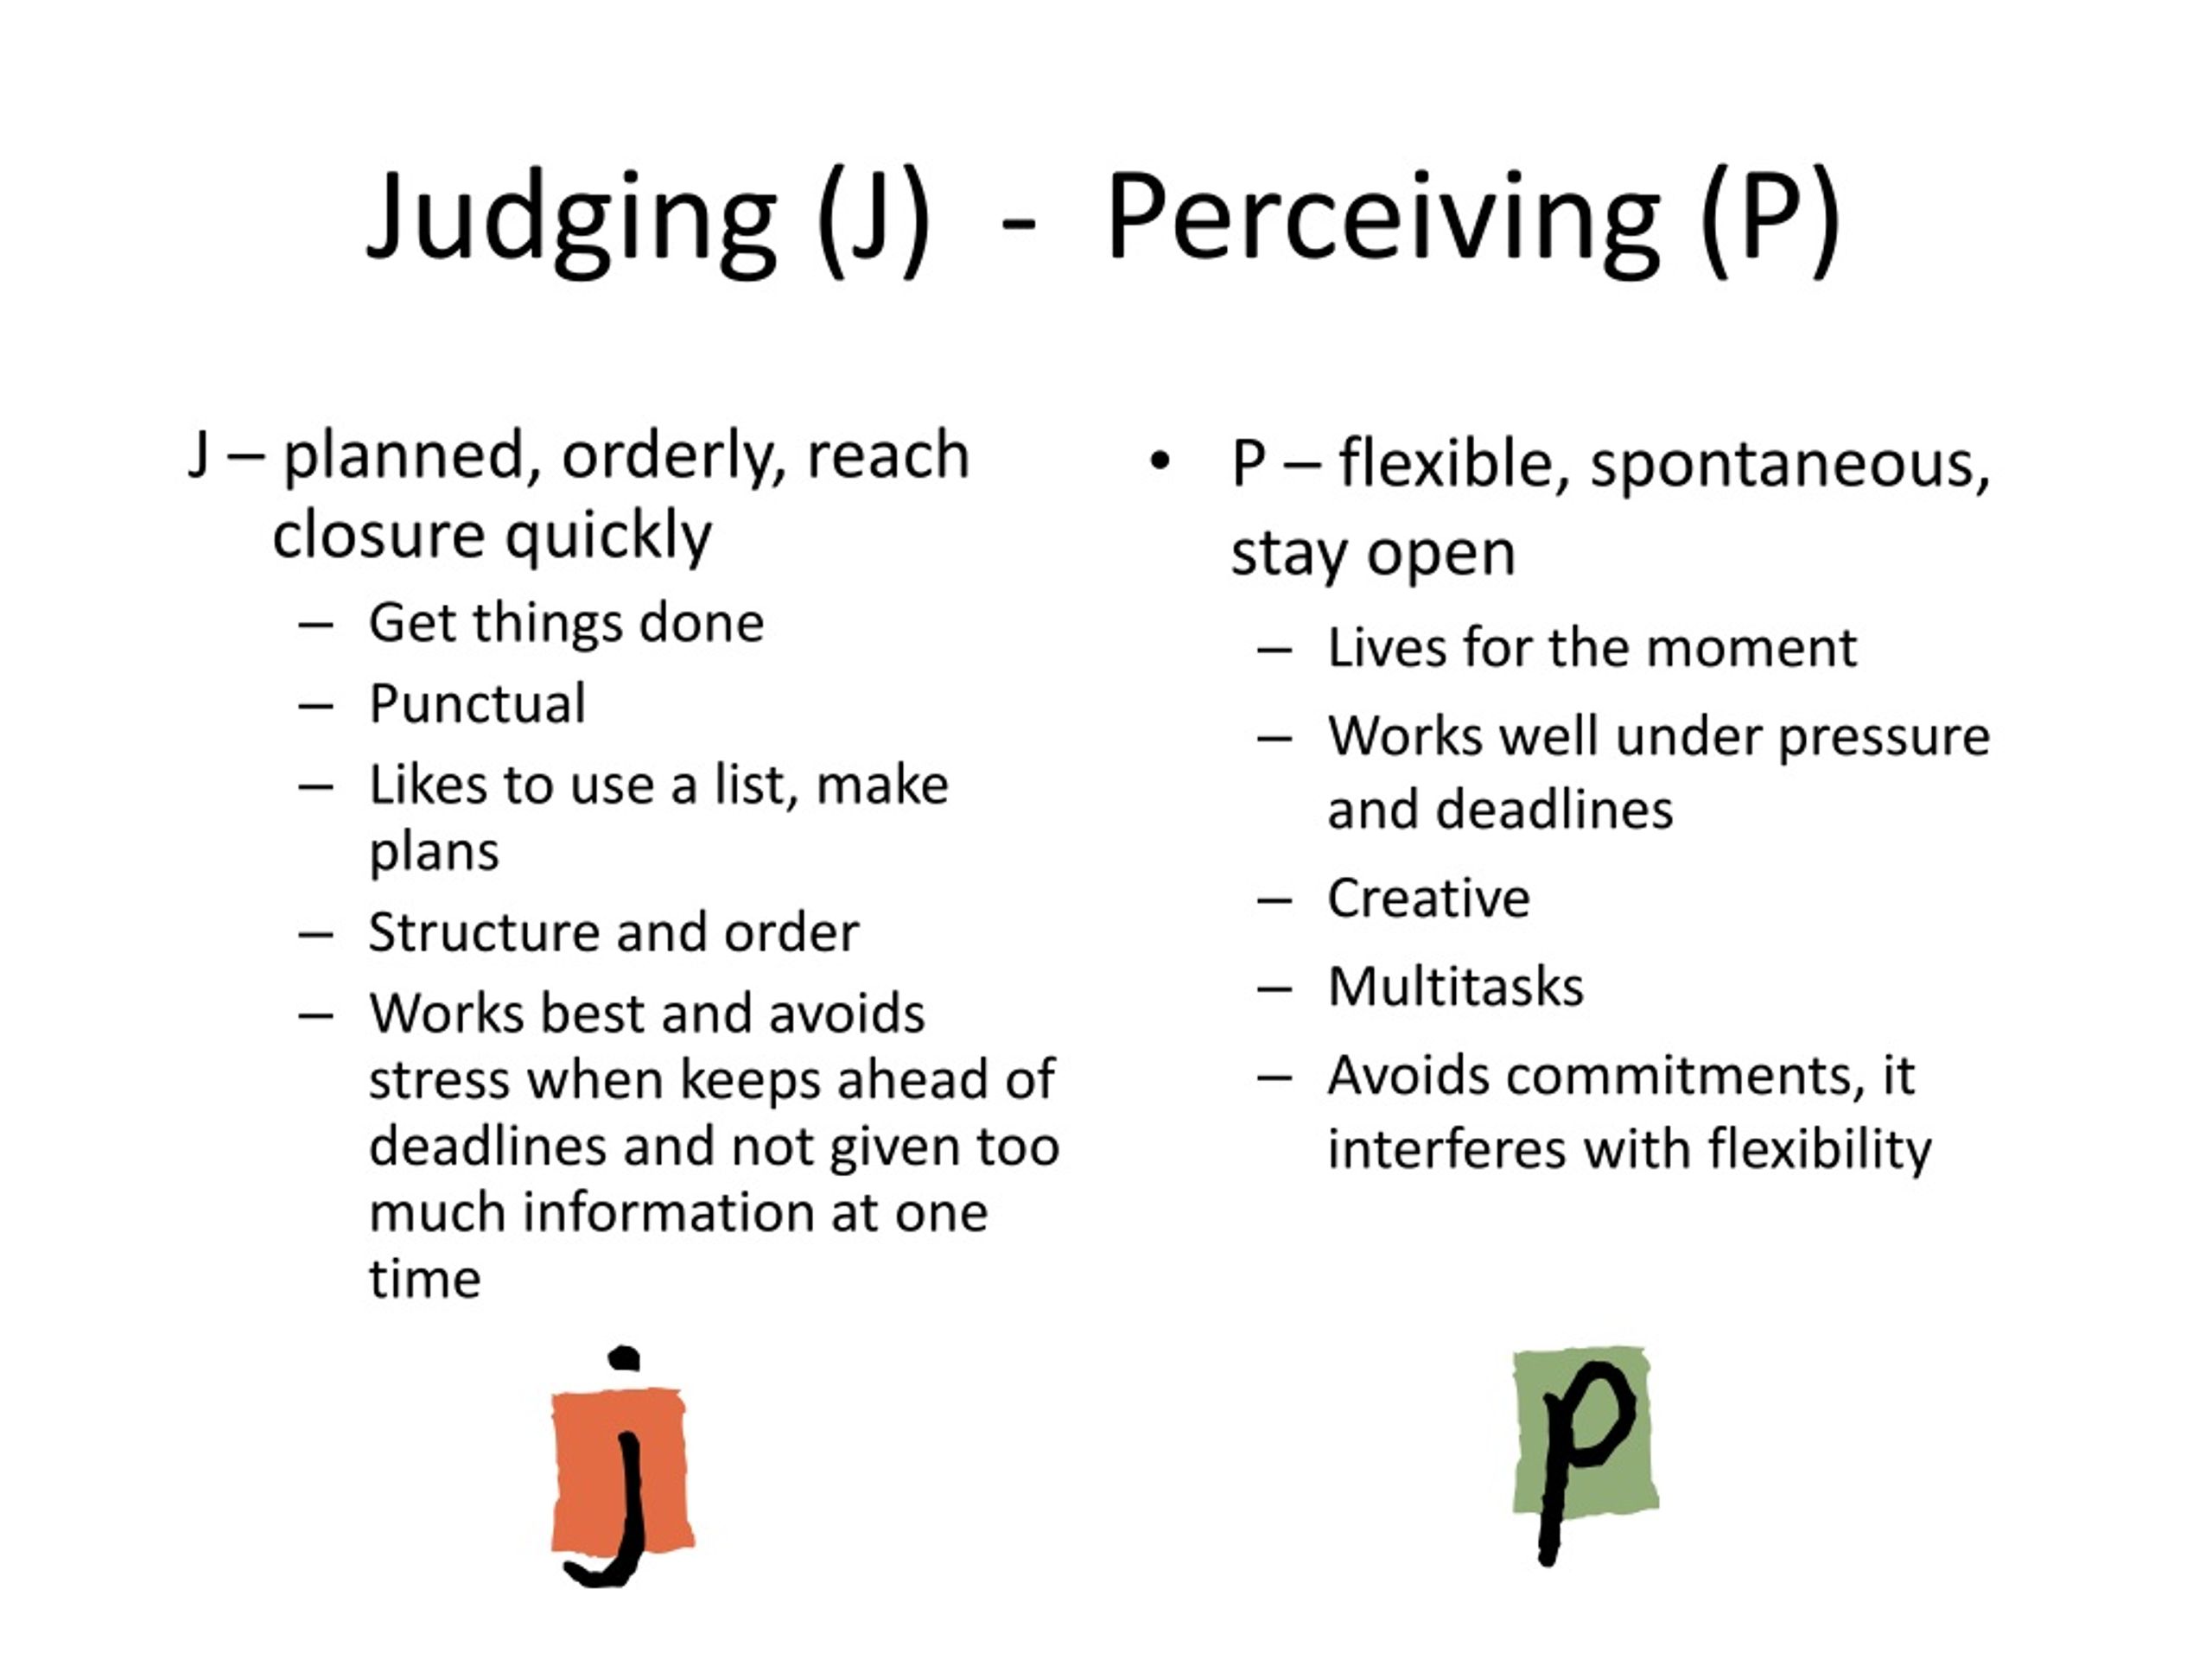 Judging with passion pdf free download download driver audio windows 7 64 bit